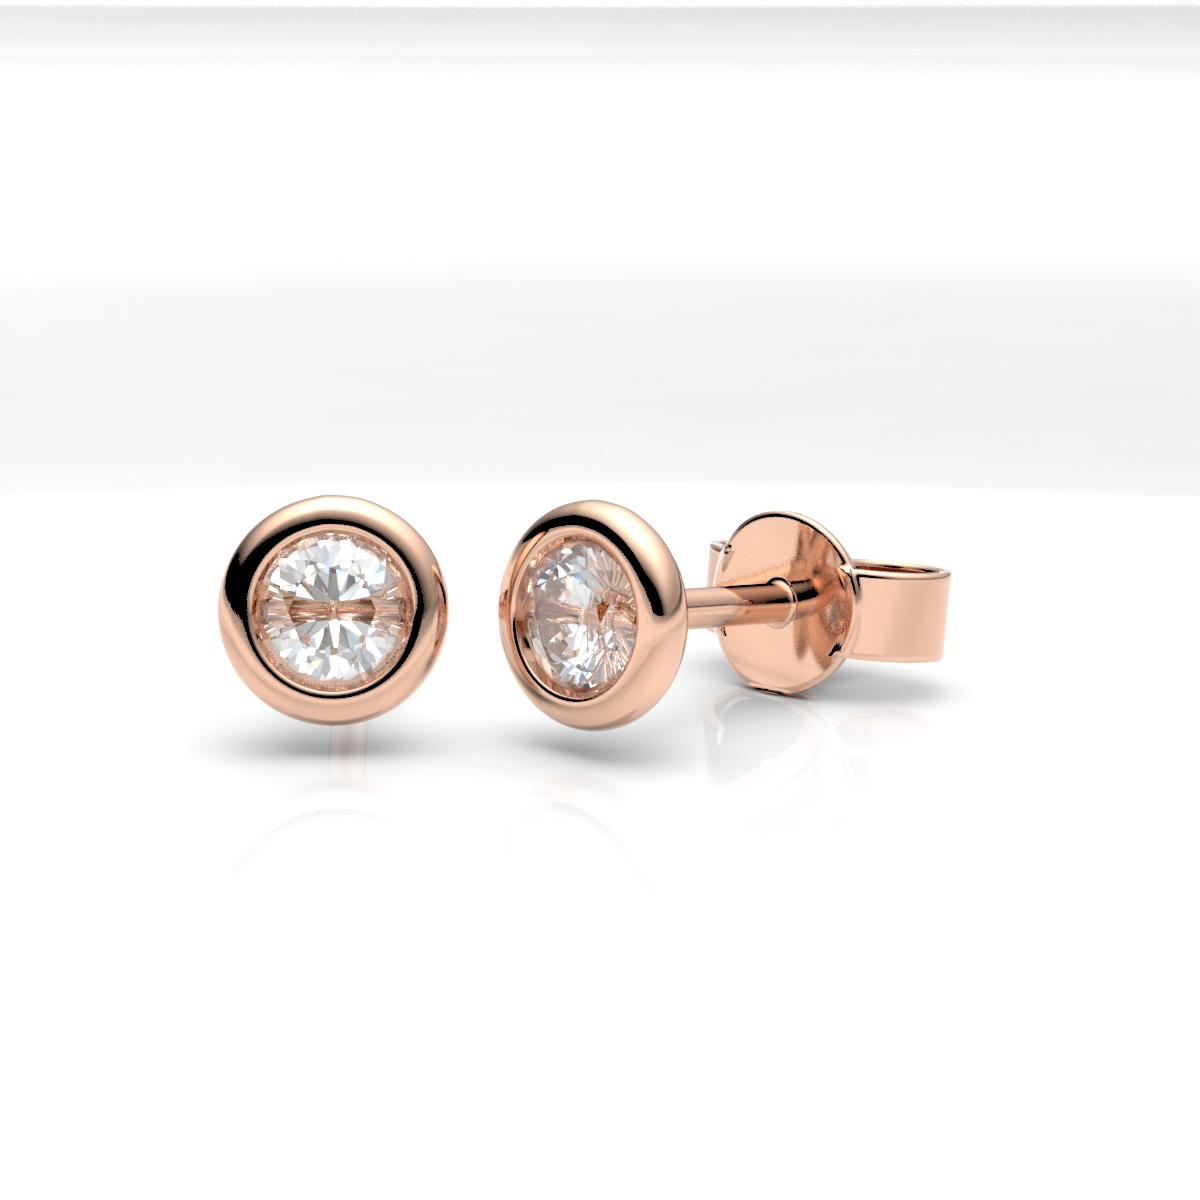 012504-5H34-001 | Ohrstecker gold-park 012504 585 Roségold<br> Brillant 0,300 ct H-SI ∅ 3.4mm<br>100% Made in Germany  